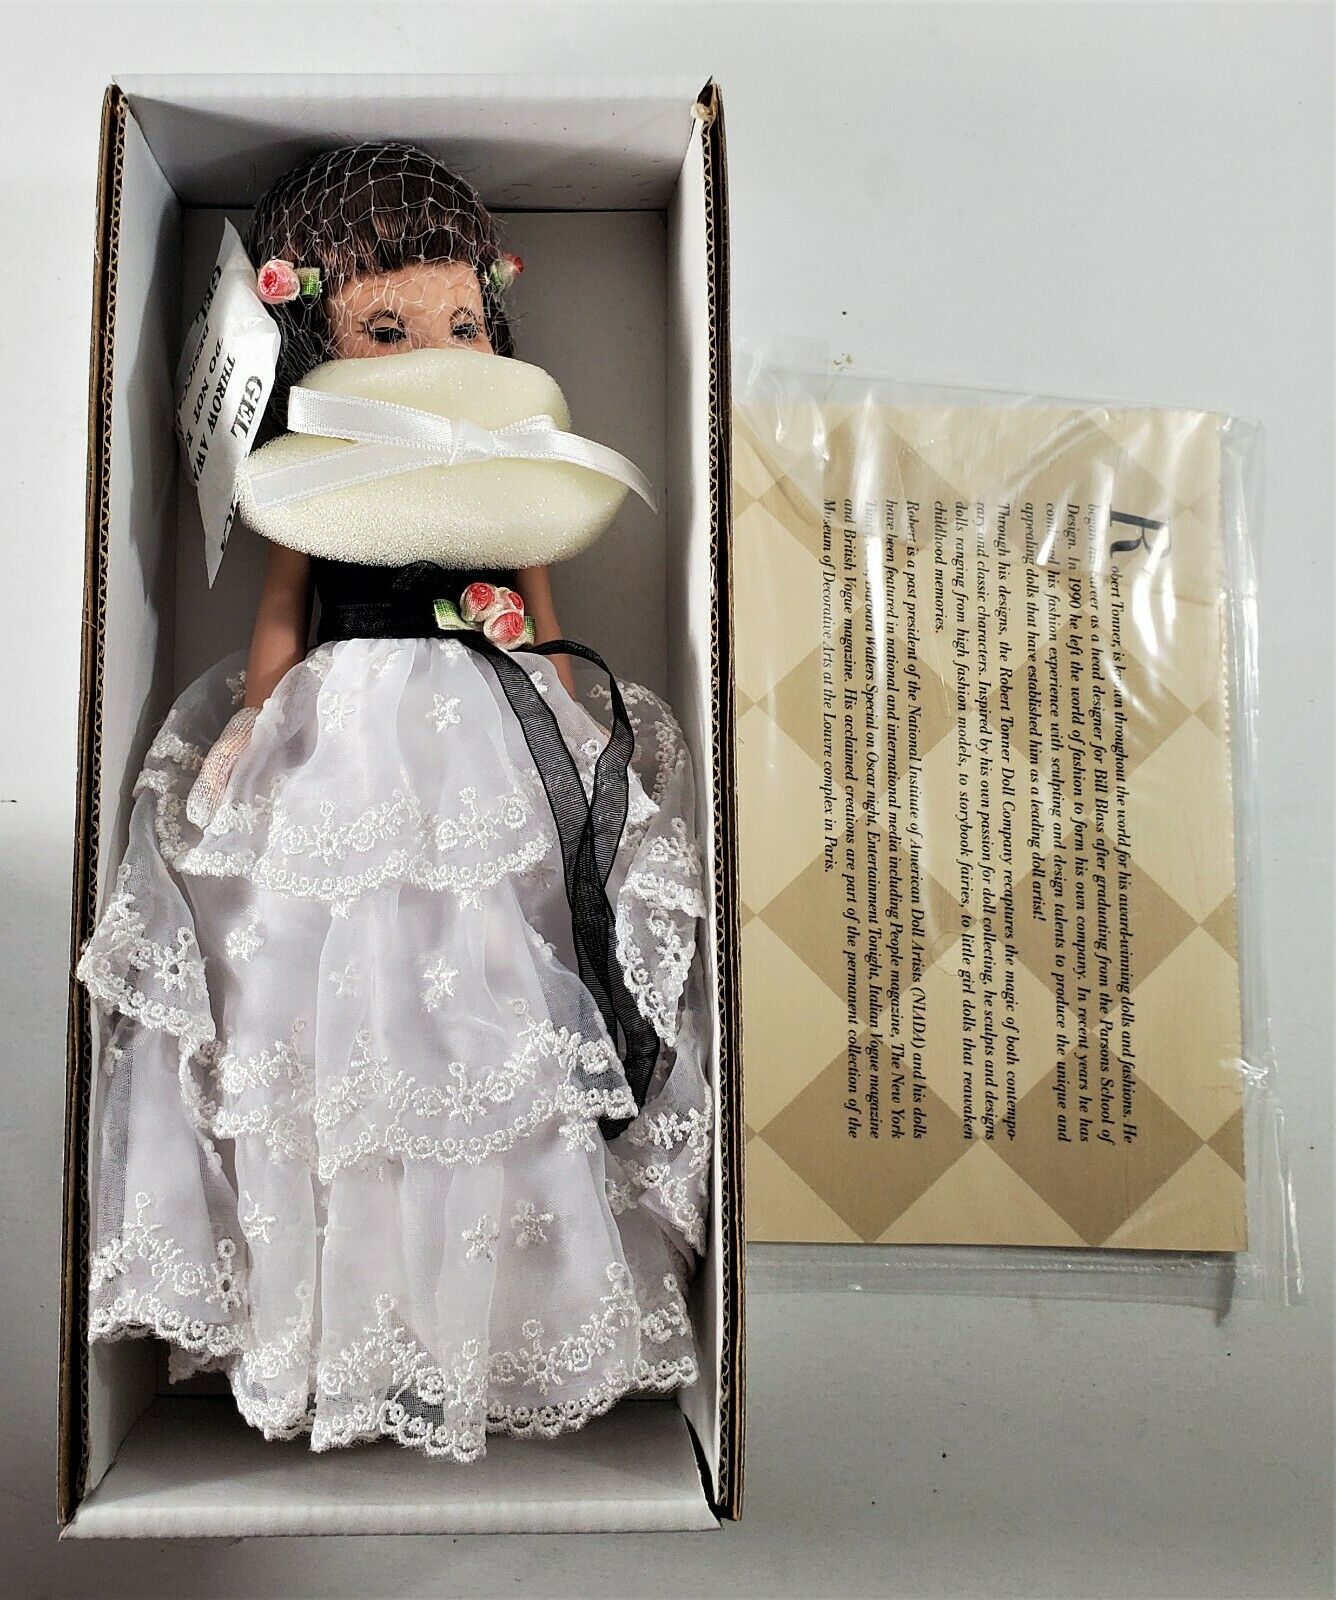 Betsy Mccall Rose Cotillion Doll & Accessories New Nib